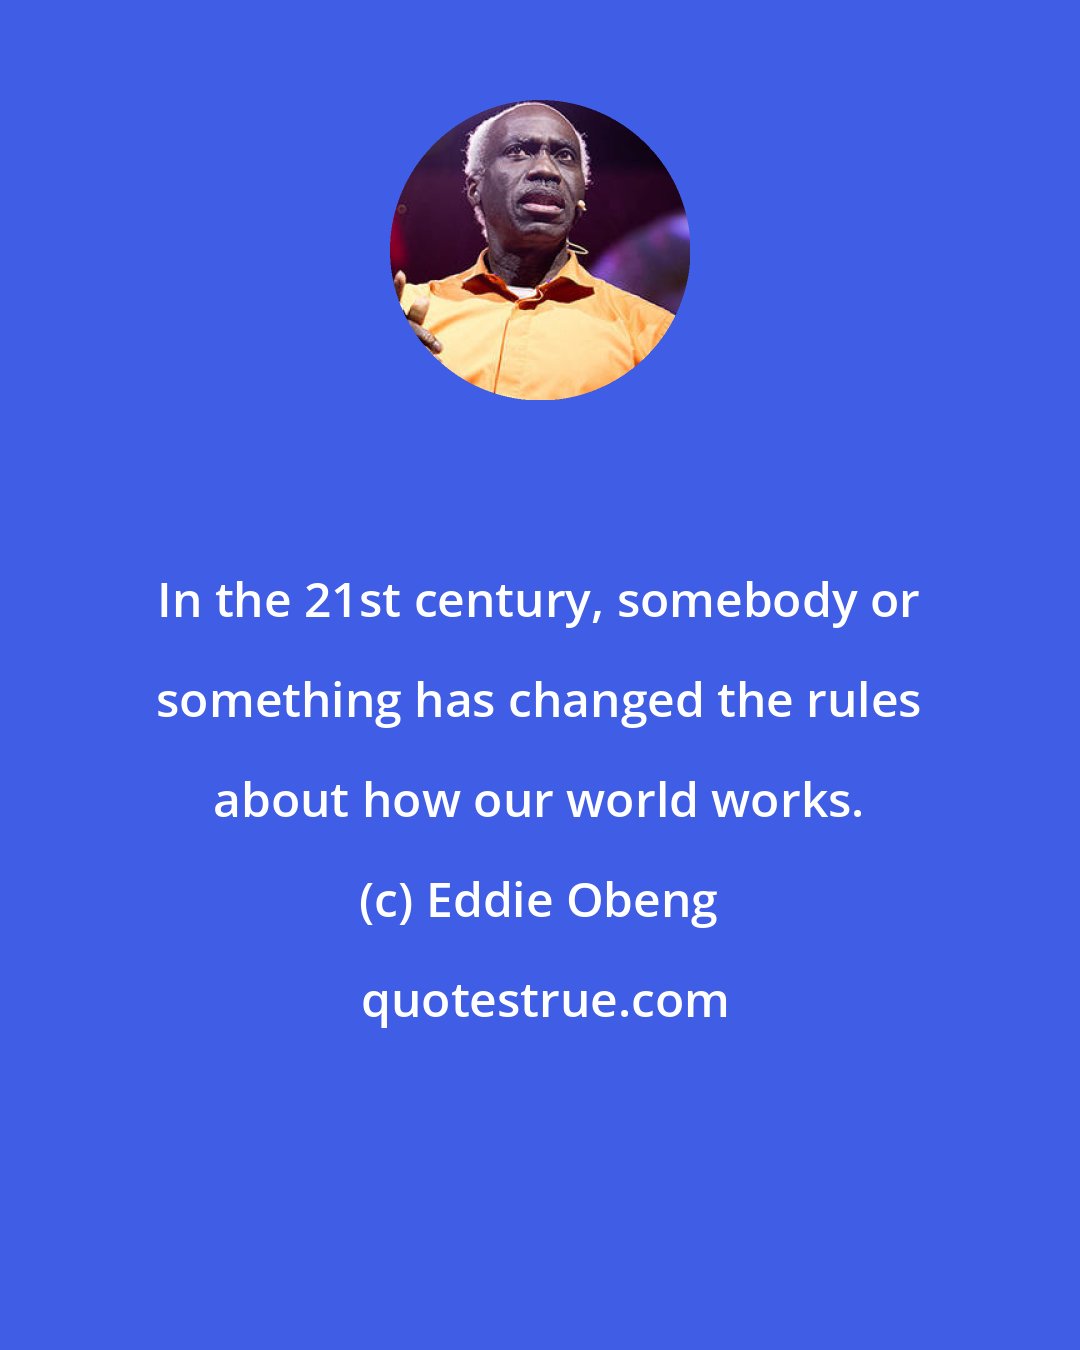 Eddie Obeng: In the 21st century, somebody or something has changed the rules about how our world works.